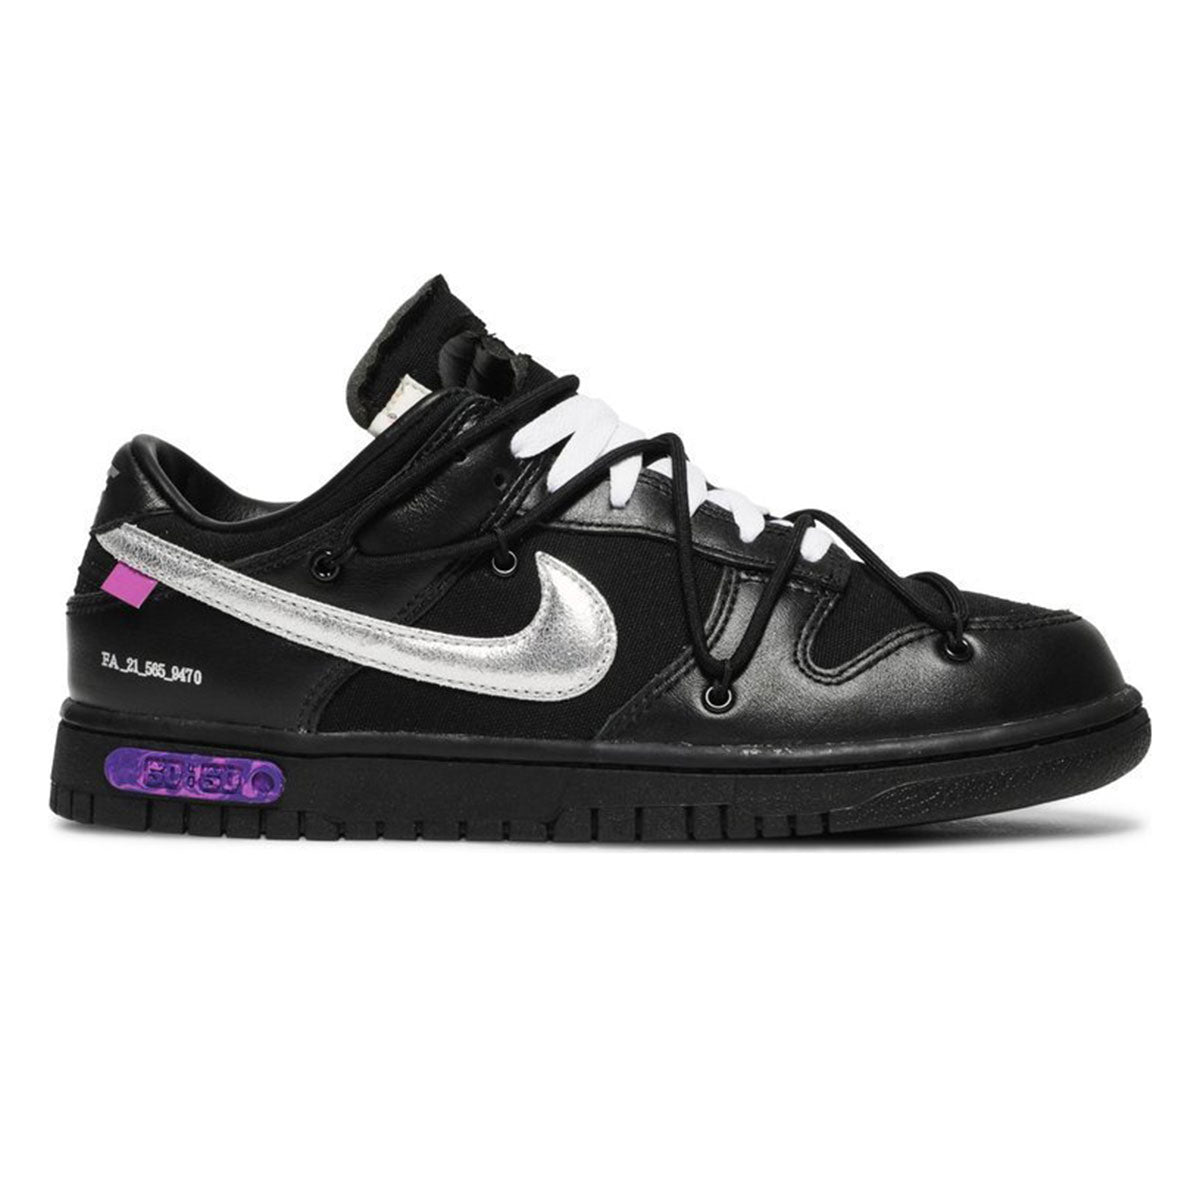 【27.0cm】Off-White × Nike Dunk Low 